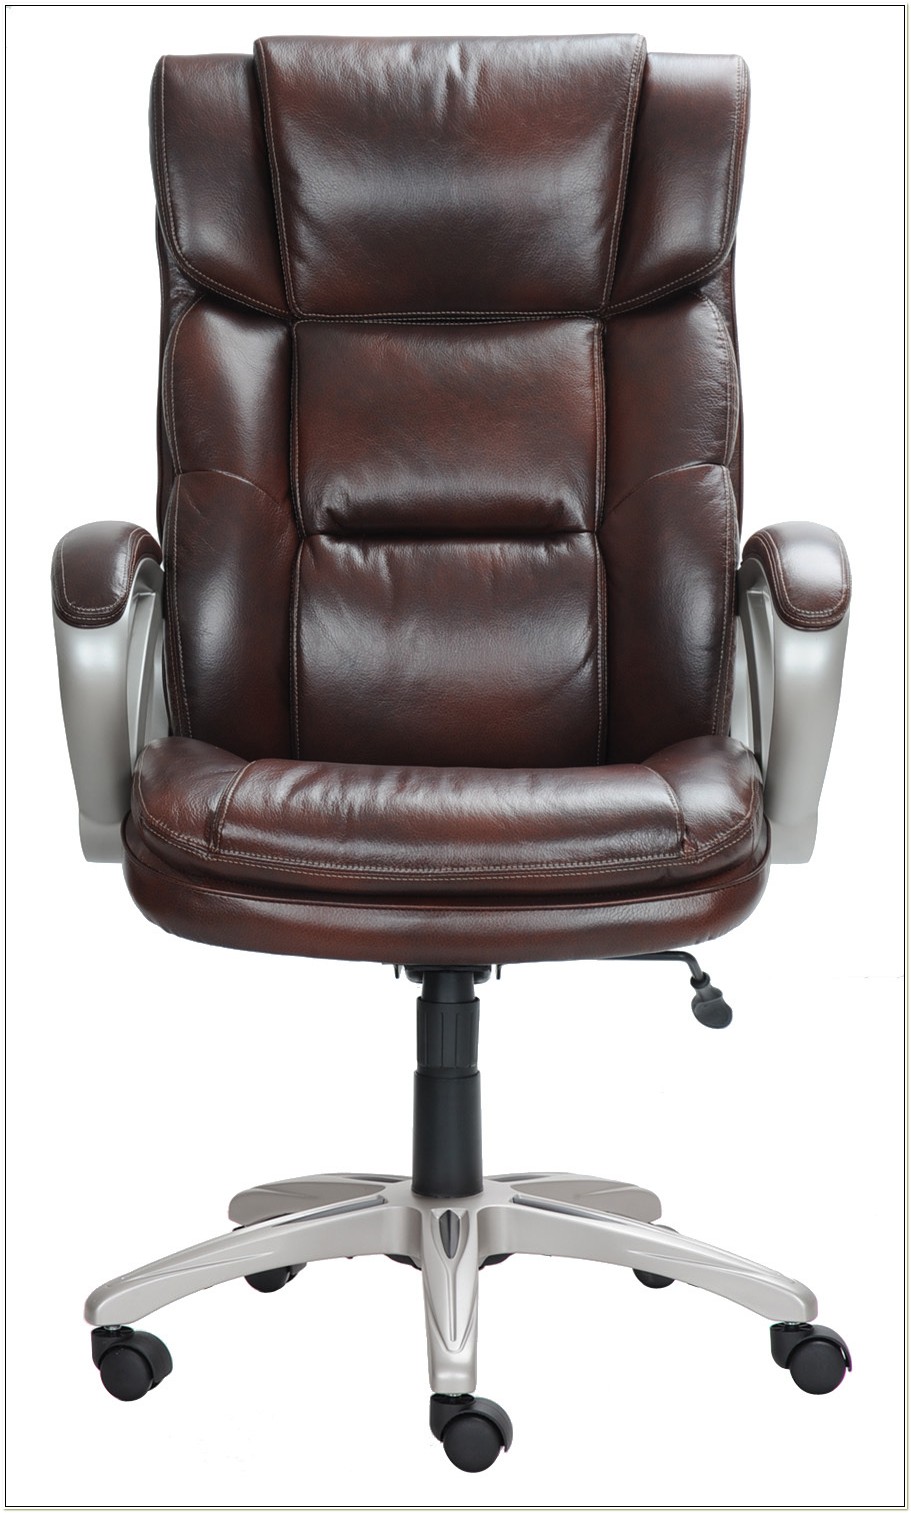 Broyhill Bonded Leather Executive Chair Model 41119 - Chairs : Home